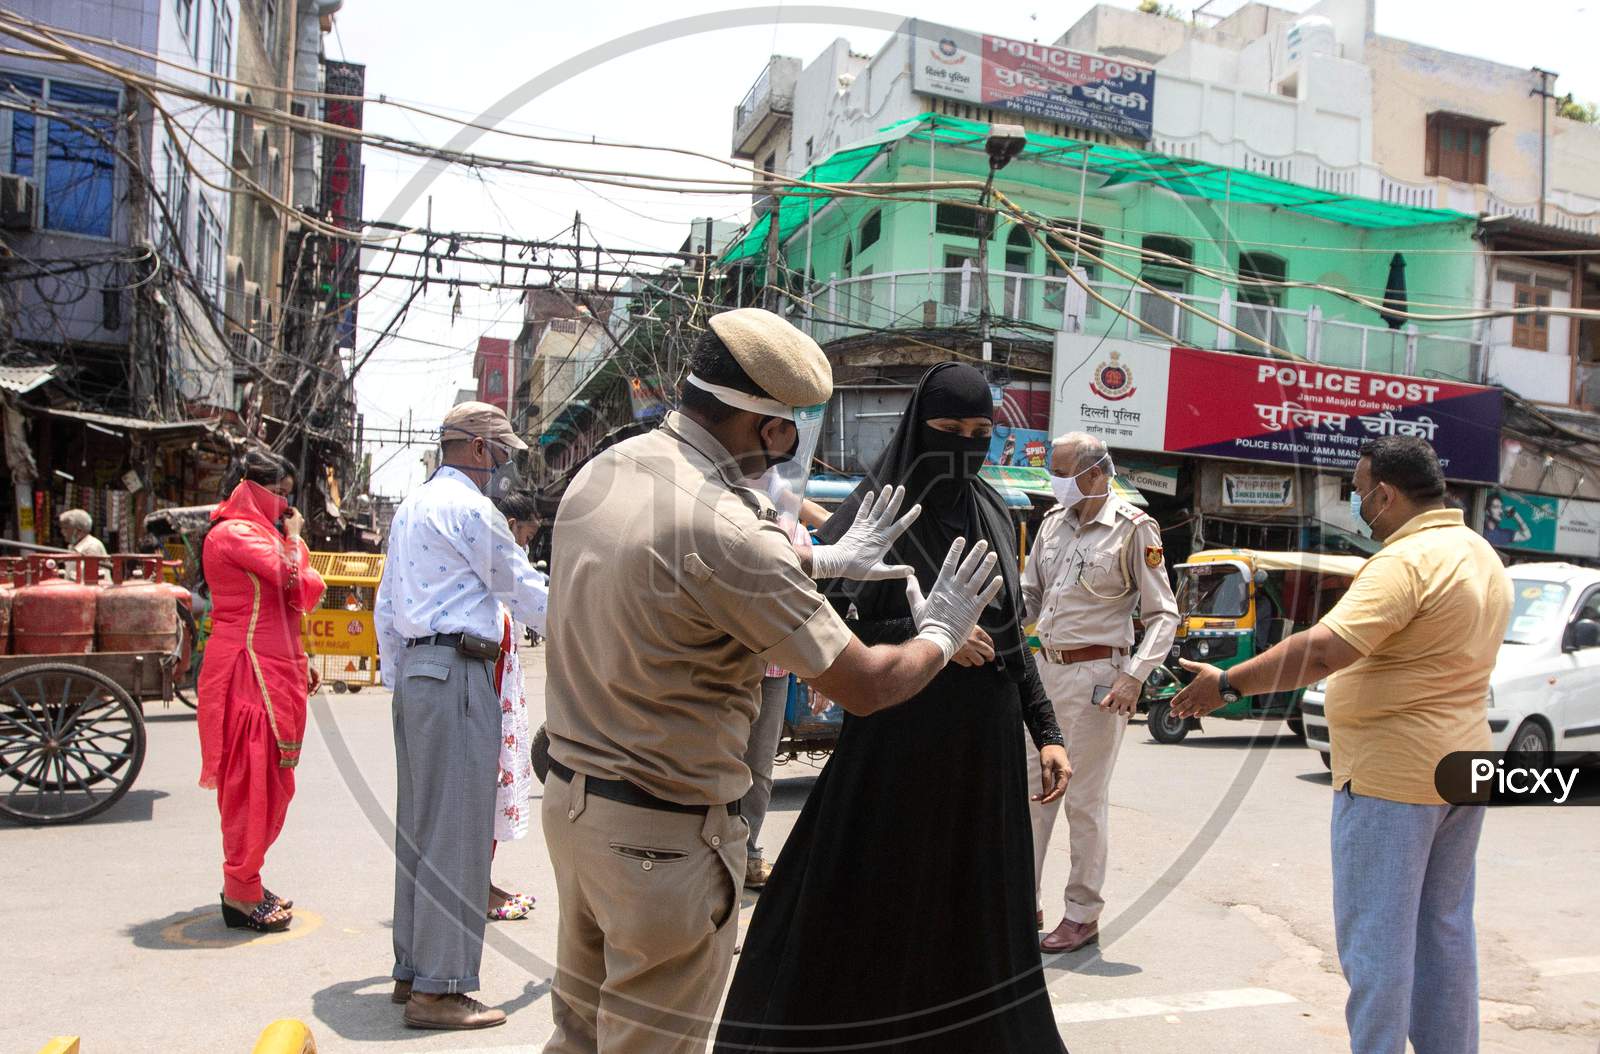 Police check people who Walk Towards Jama Masjid After The Opening Of Most Of The Religious Places As India Eases Lockdown Restrictions That Were Imposed To Slow The Spread Of The Coronavirus Disease (Covid-19), In The Old Quarters Of Delhi, India, June 8, 2020.